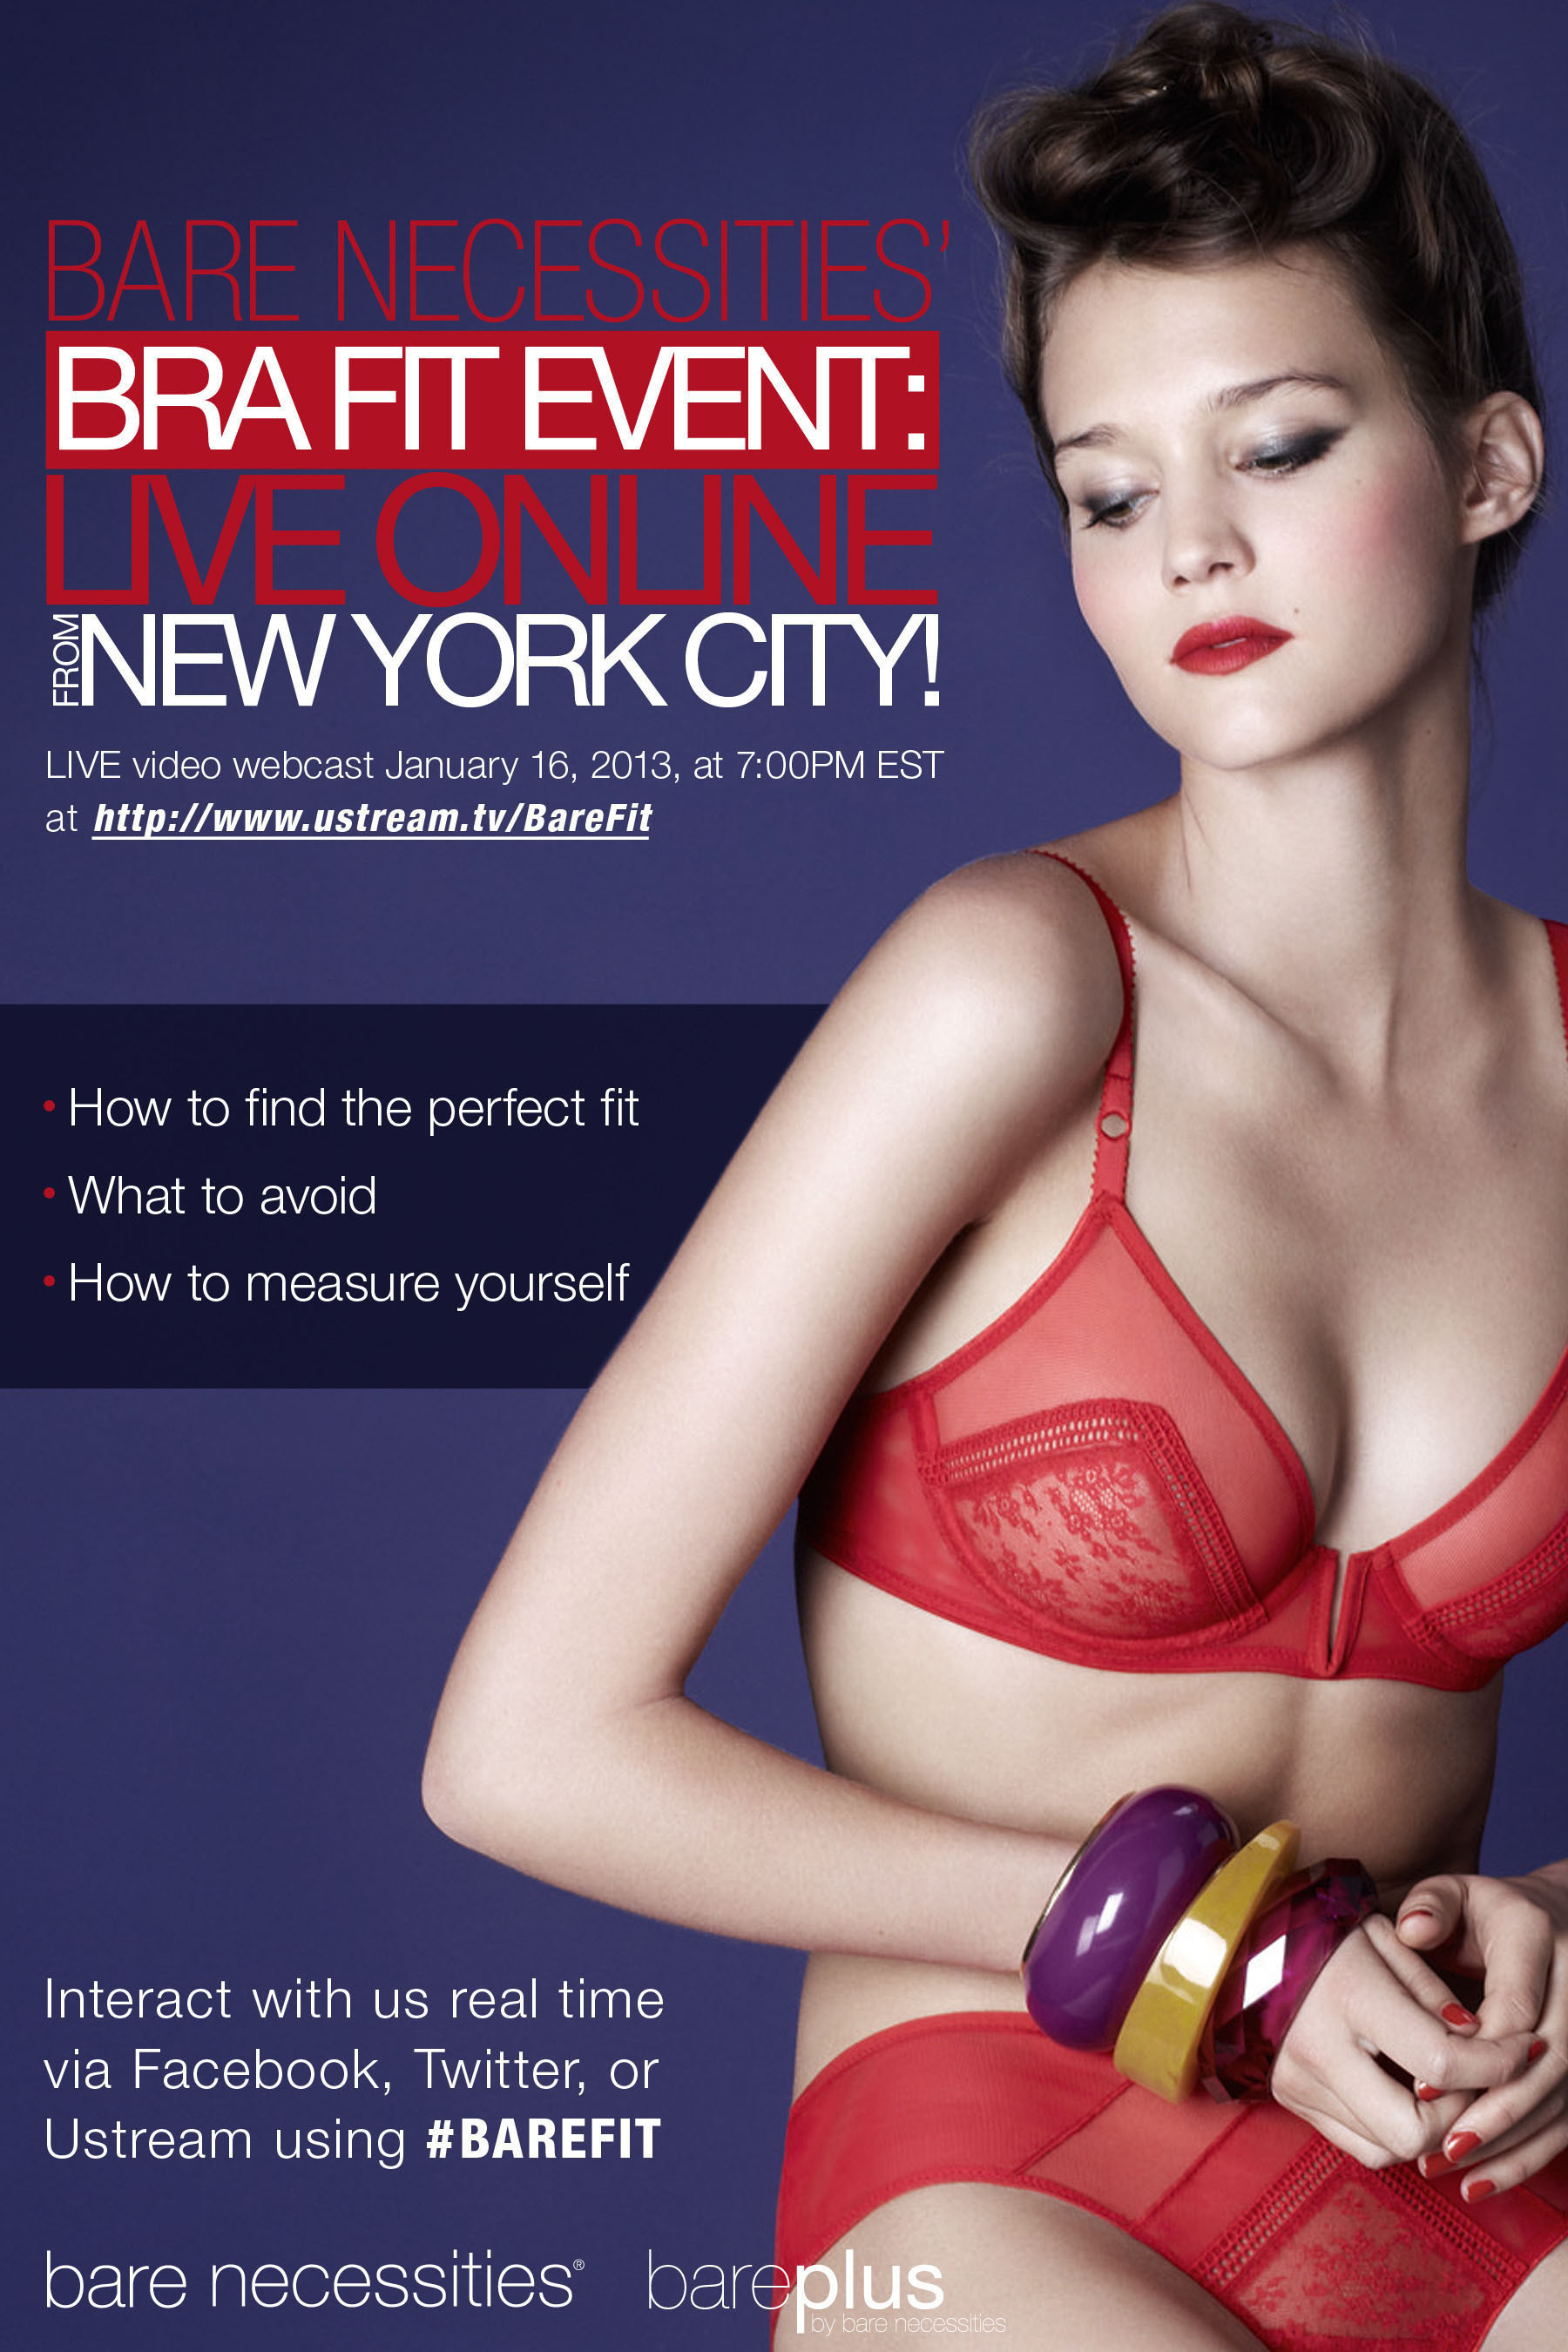 Bare Necessities' Live Bra Fit Webcast Takes Over the Web January